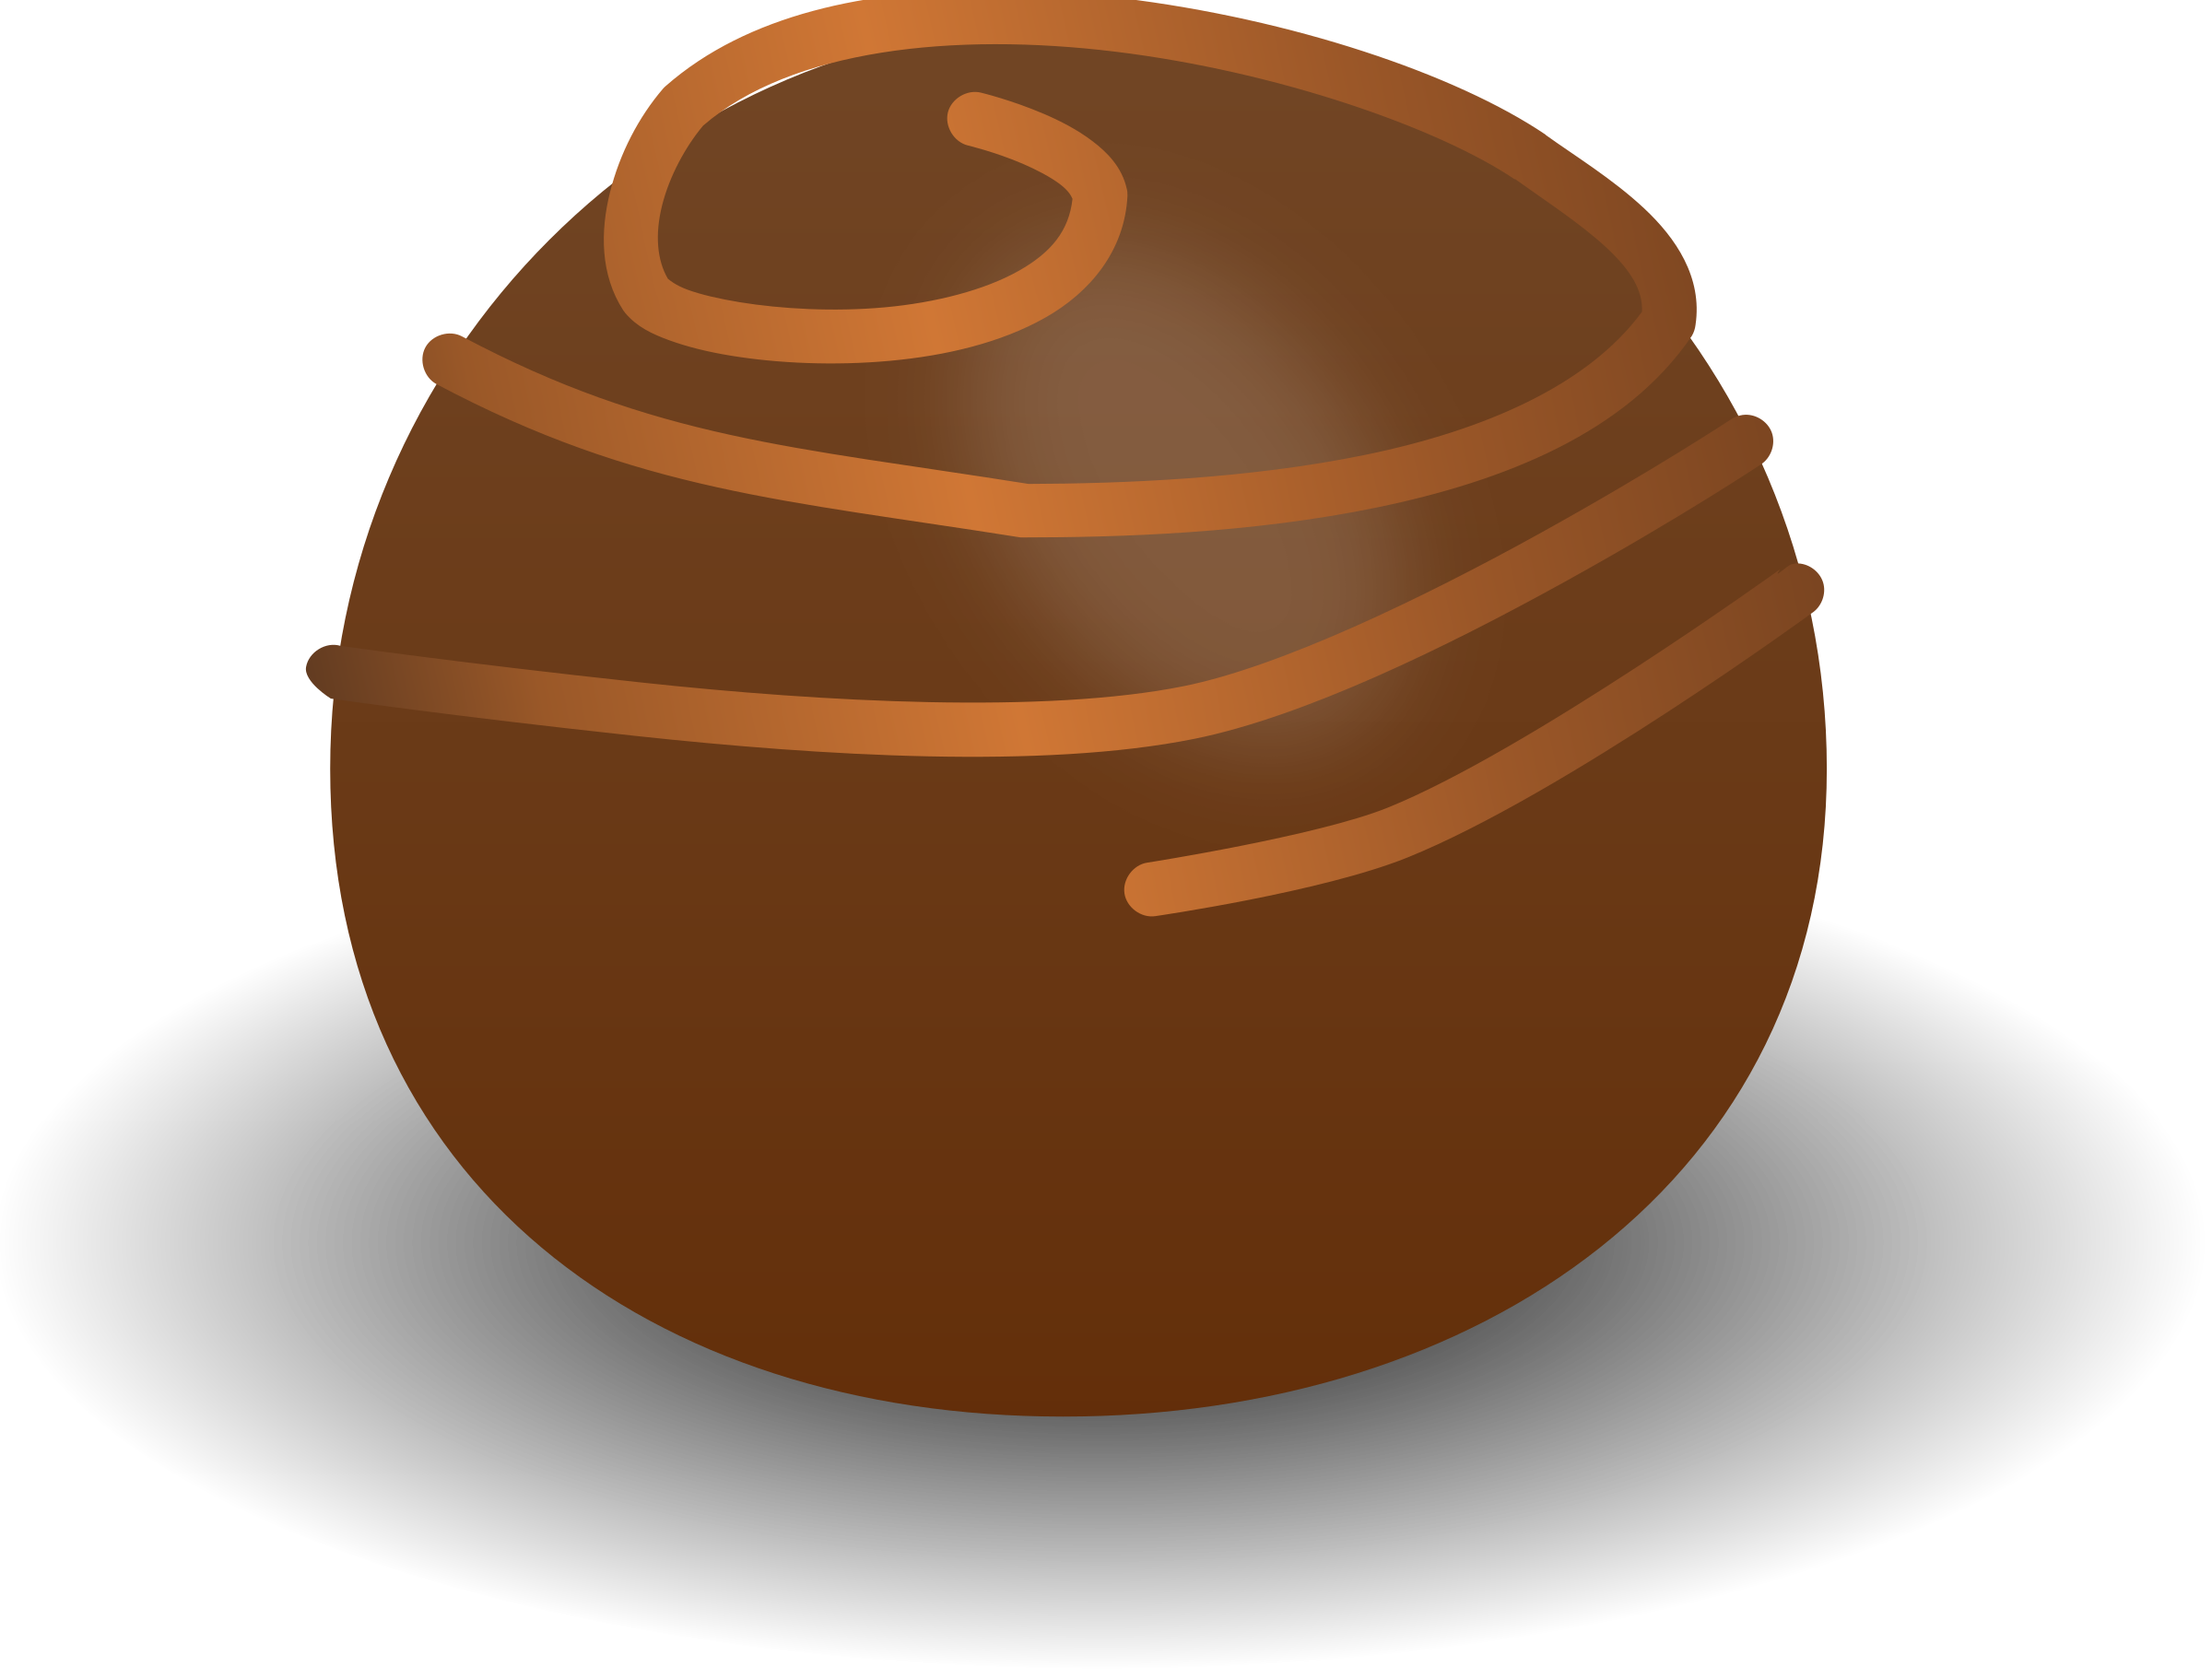 egg clipart chocolate